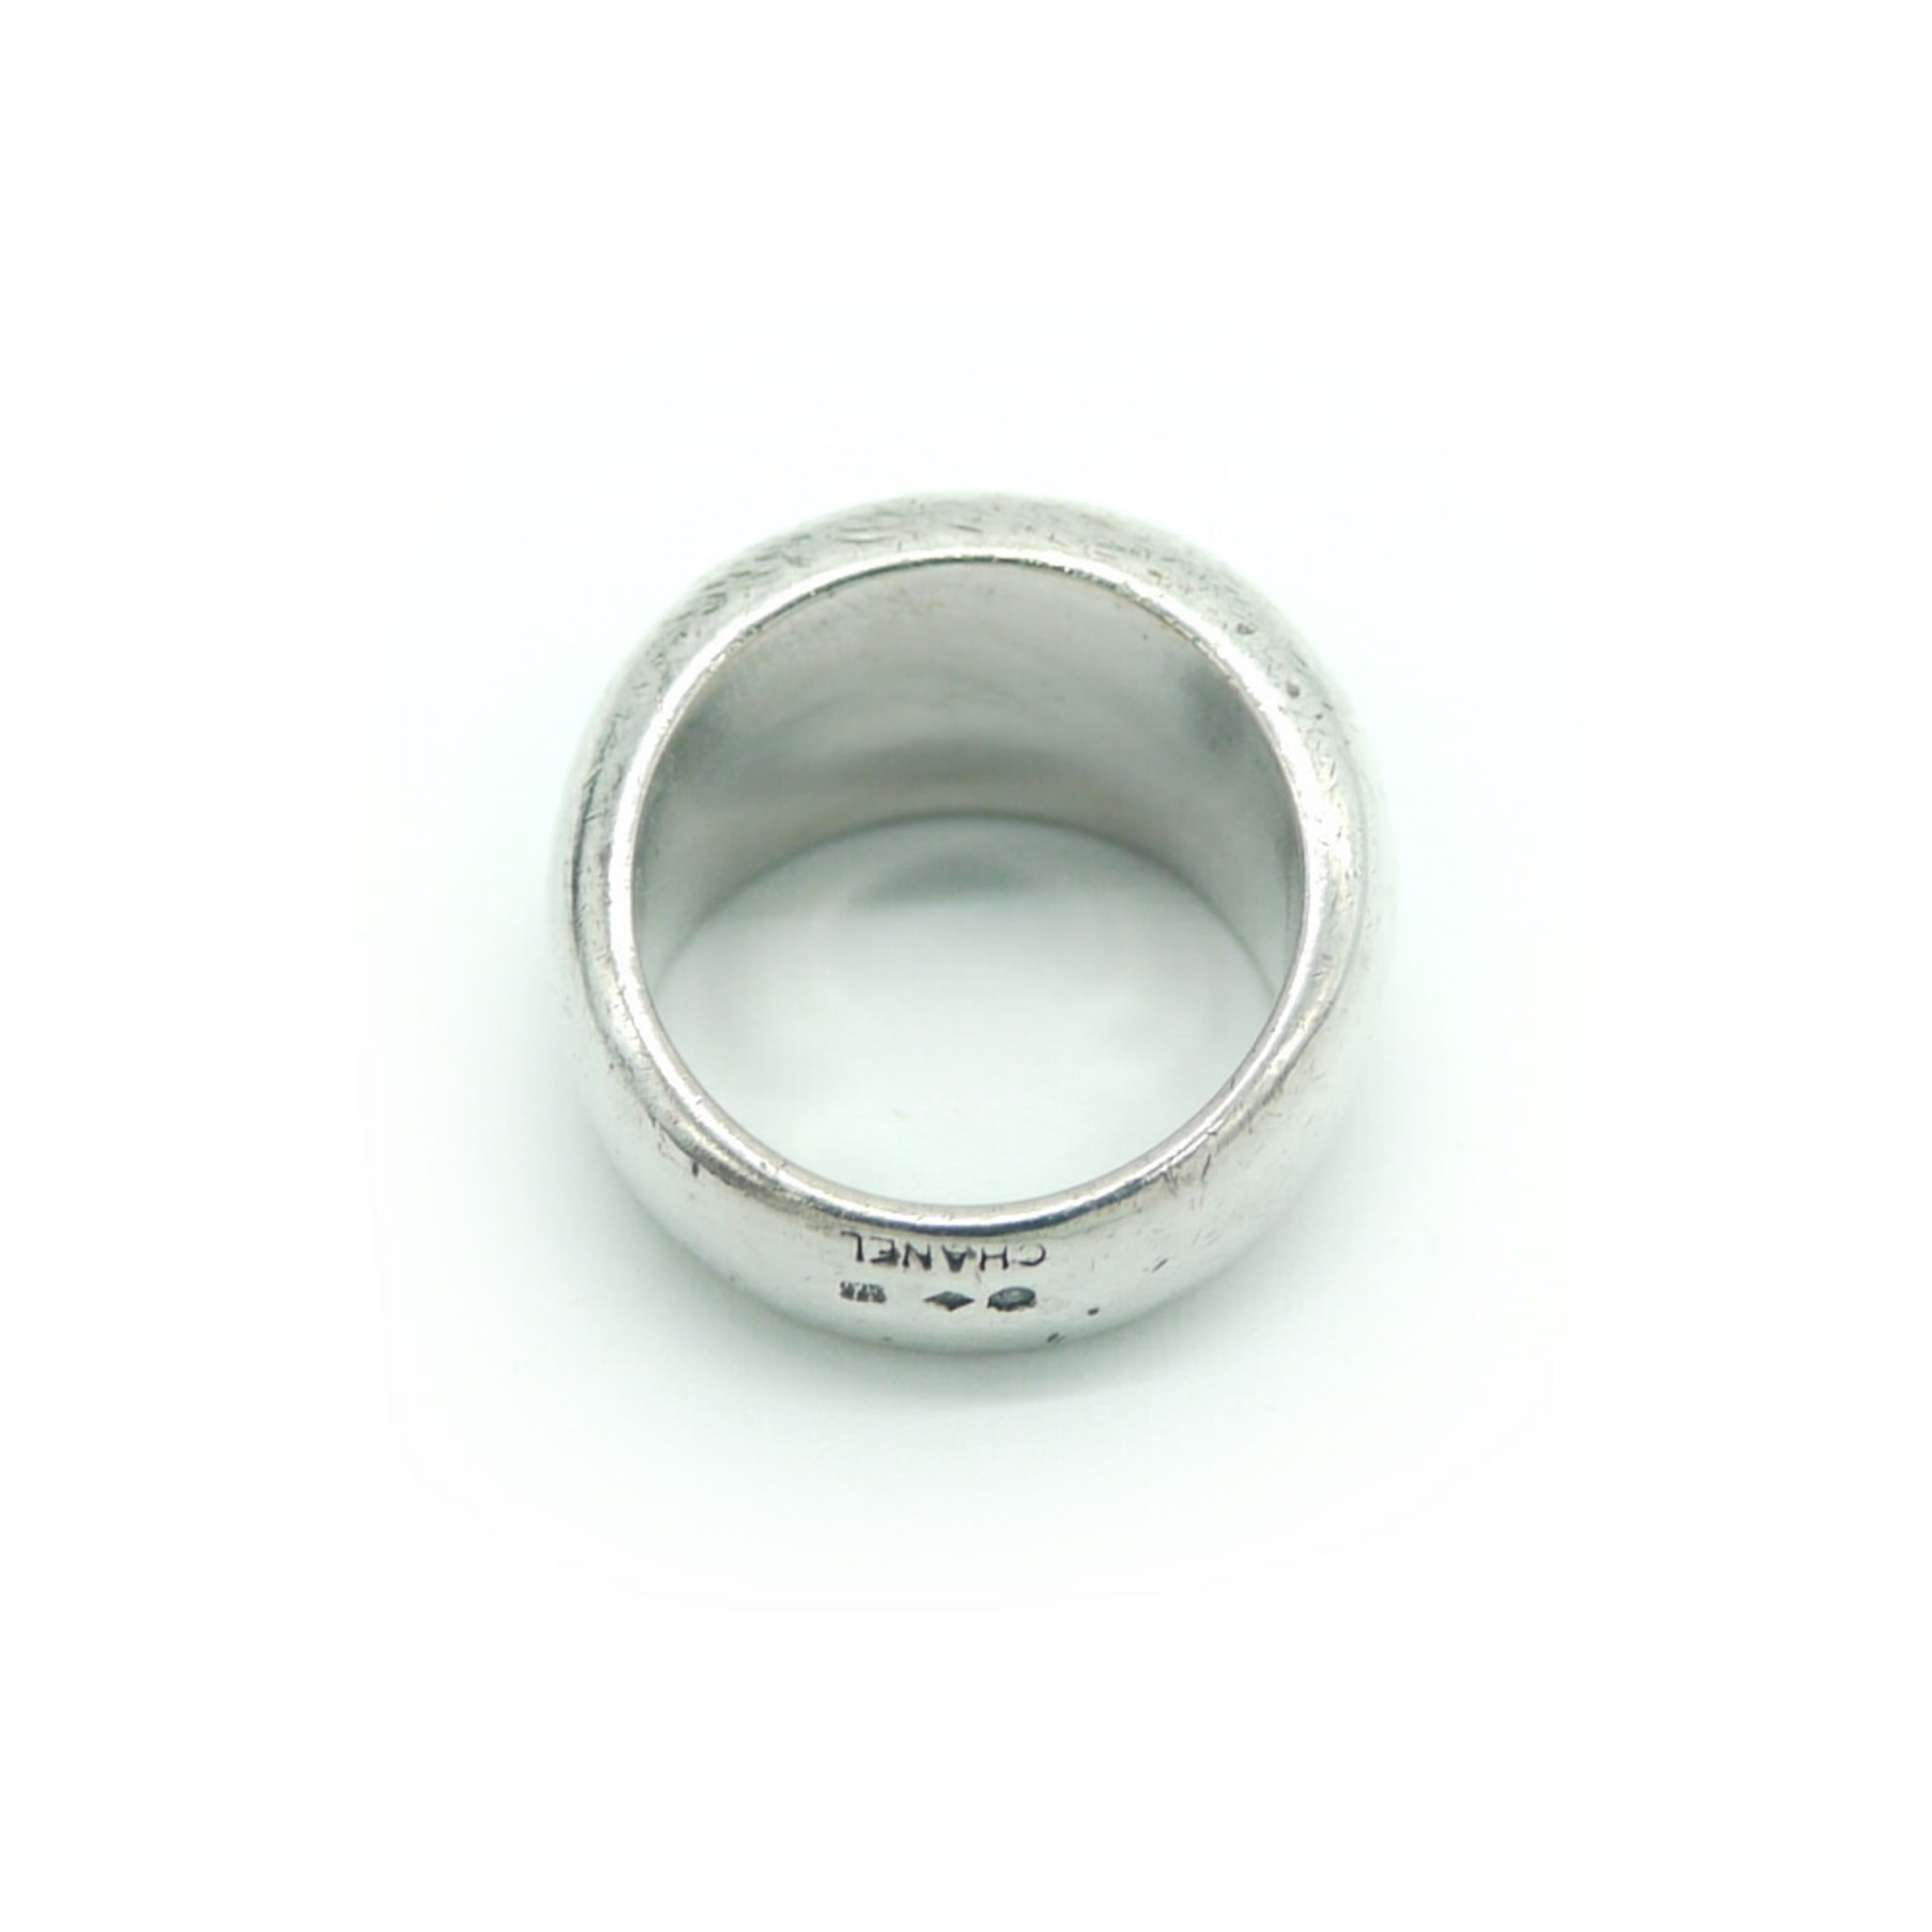 CHANEL Chanel silver 925 moon type signature ring No. 15